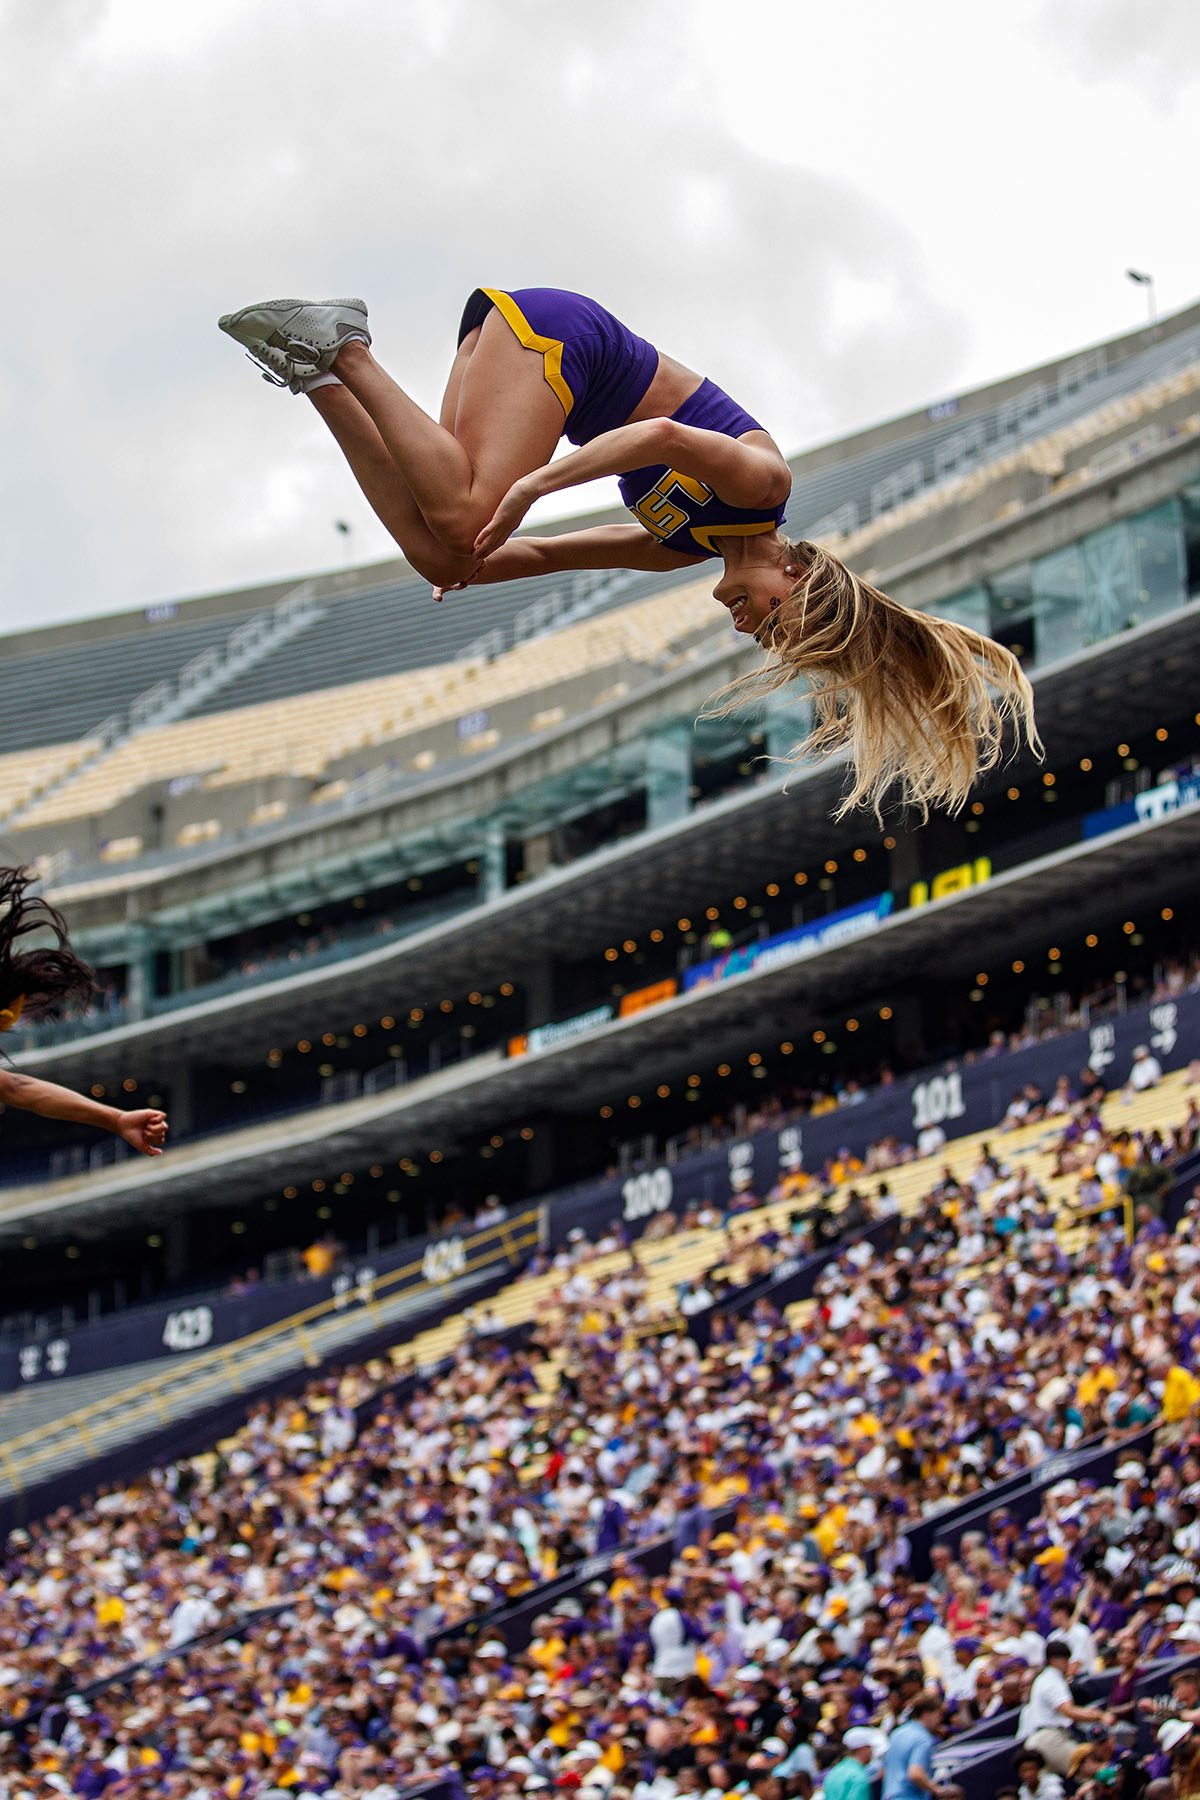 An LSU Tigers cheerleader is seen mid-air during a performance.